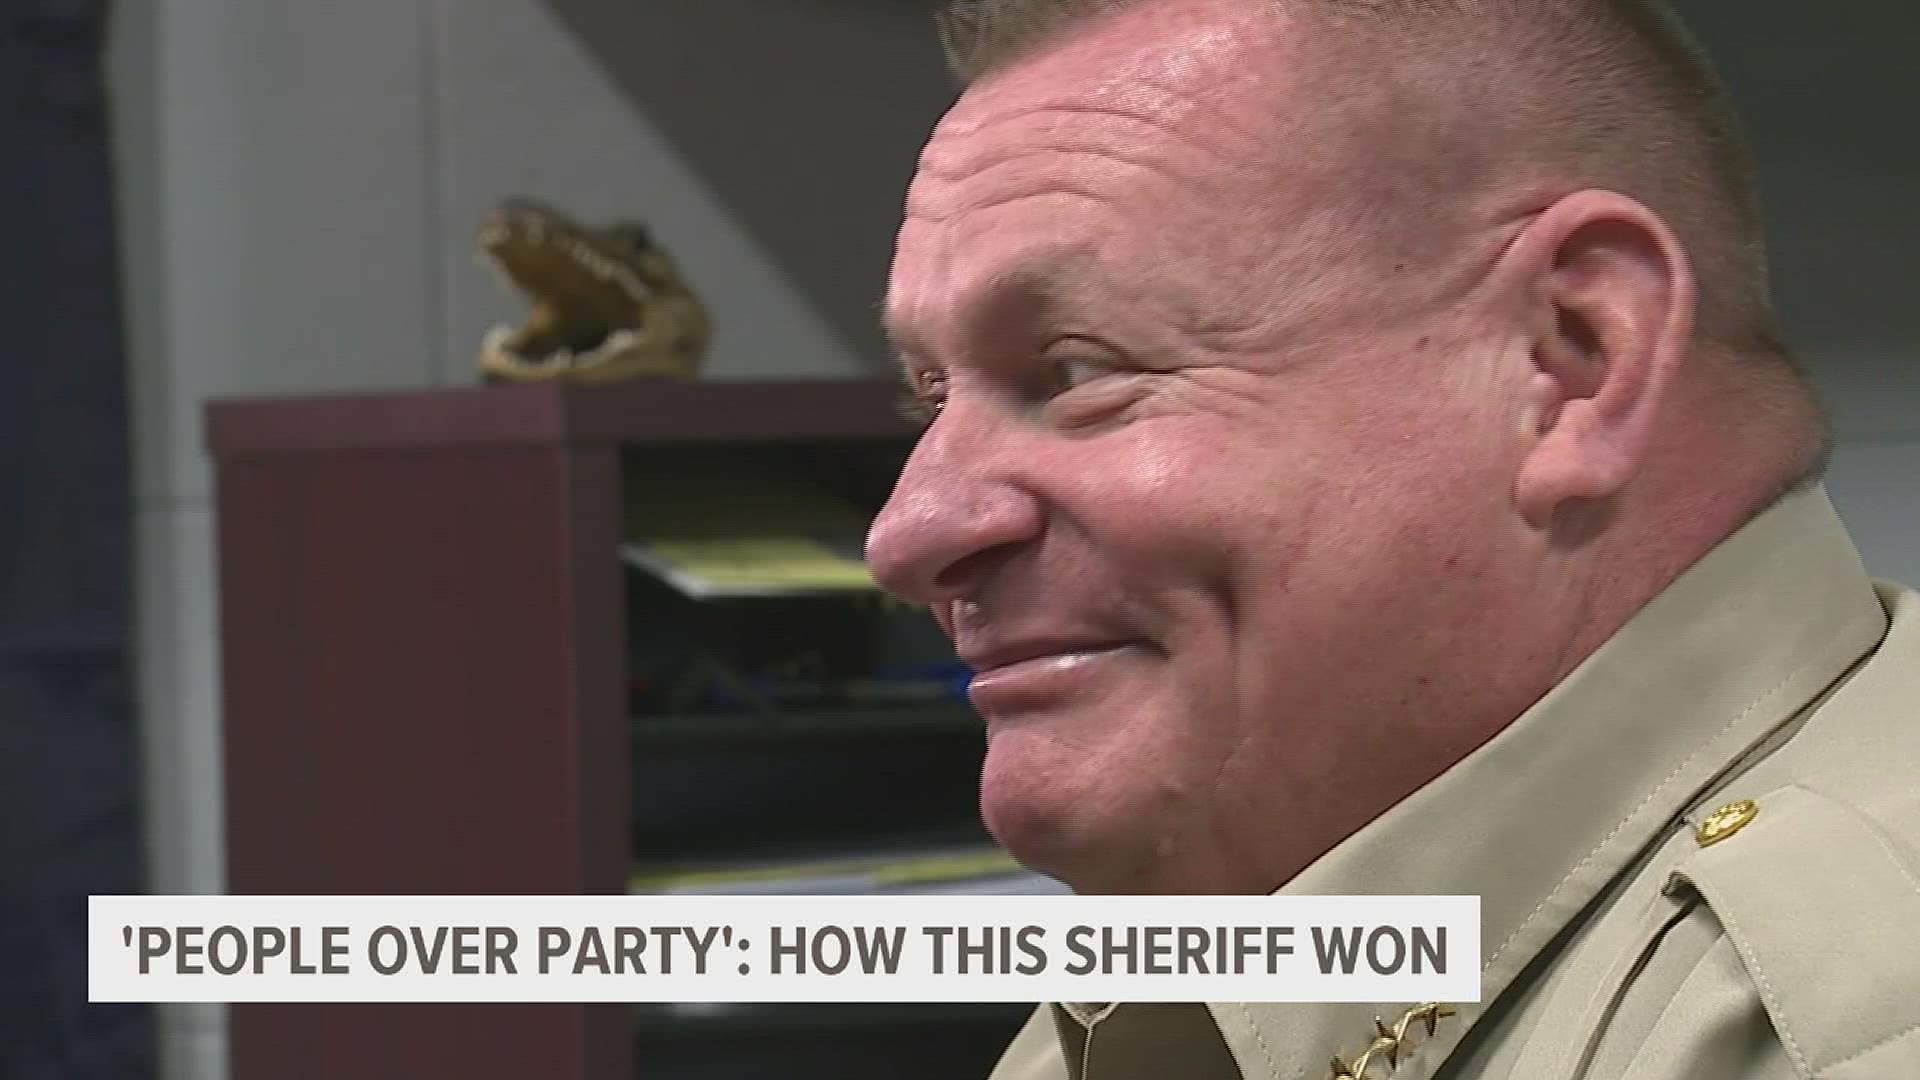 Out of 13 state and county races, Sheriff John Booker was the only Democrat to walk away victorious. He says it's thanks to voters putting people over parties.